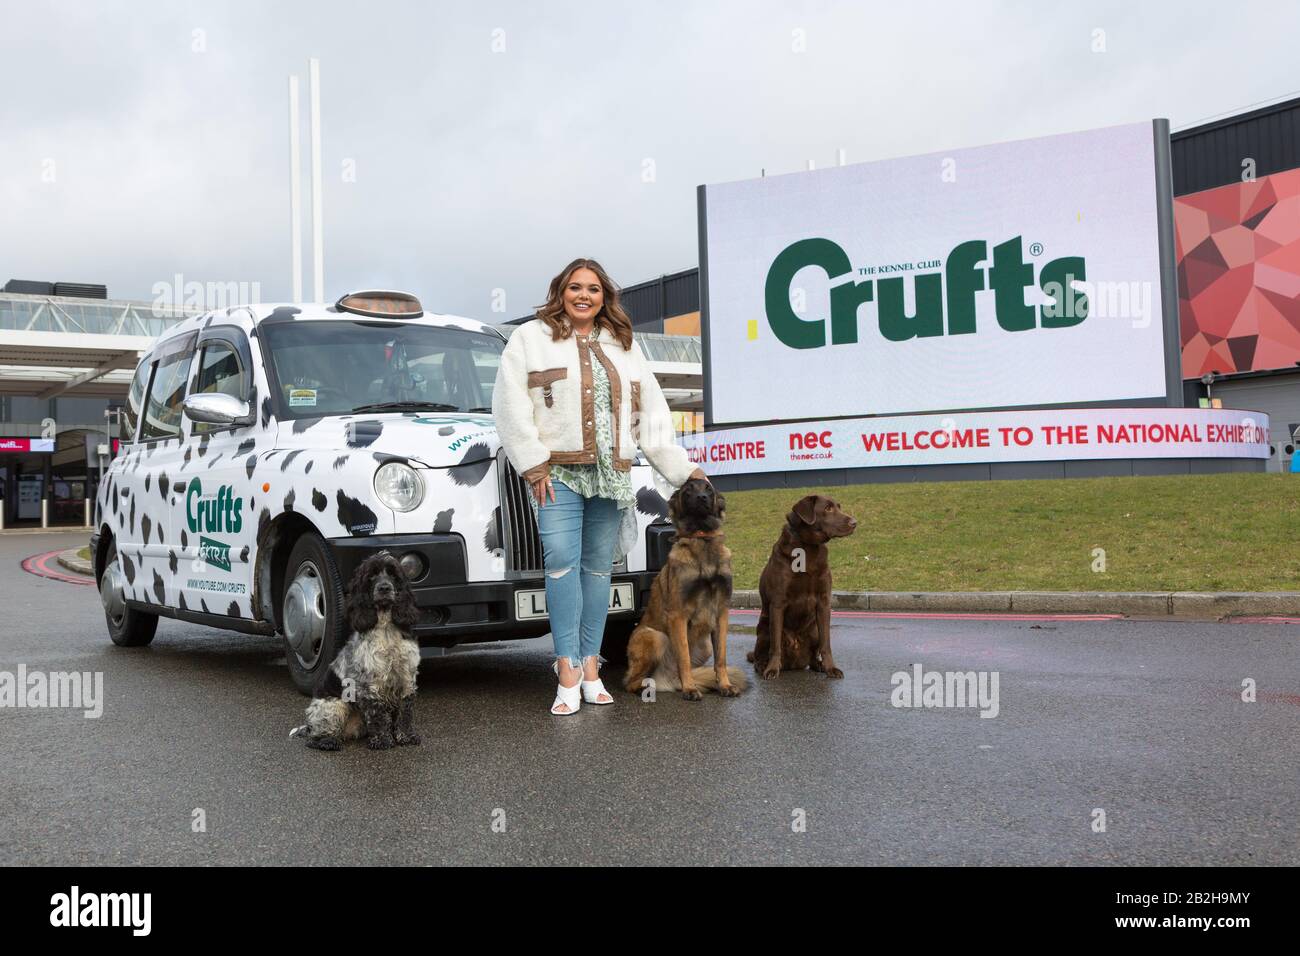 Birmingham NEC, UK. 3rd Mar, 2020. Scarlett Moffatt, star of Gogglebox and I'm a Celebrity, arrives in style in a Dalmation themed taxi at Crufts 2020, NEC Birmingham, to start preparations for the new Crufts Extra Youtube show. Crufts 2020 runs from 5th to 8th March. Credit: Peter Lopeman/Alamy Live News Stock Photo